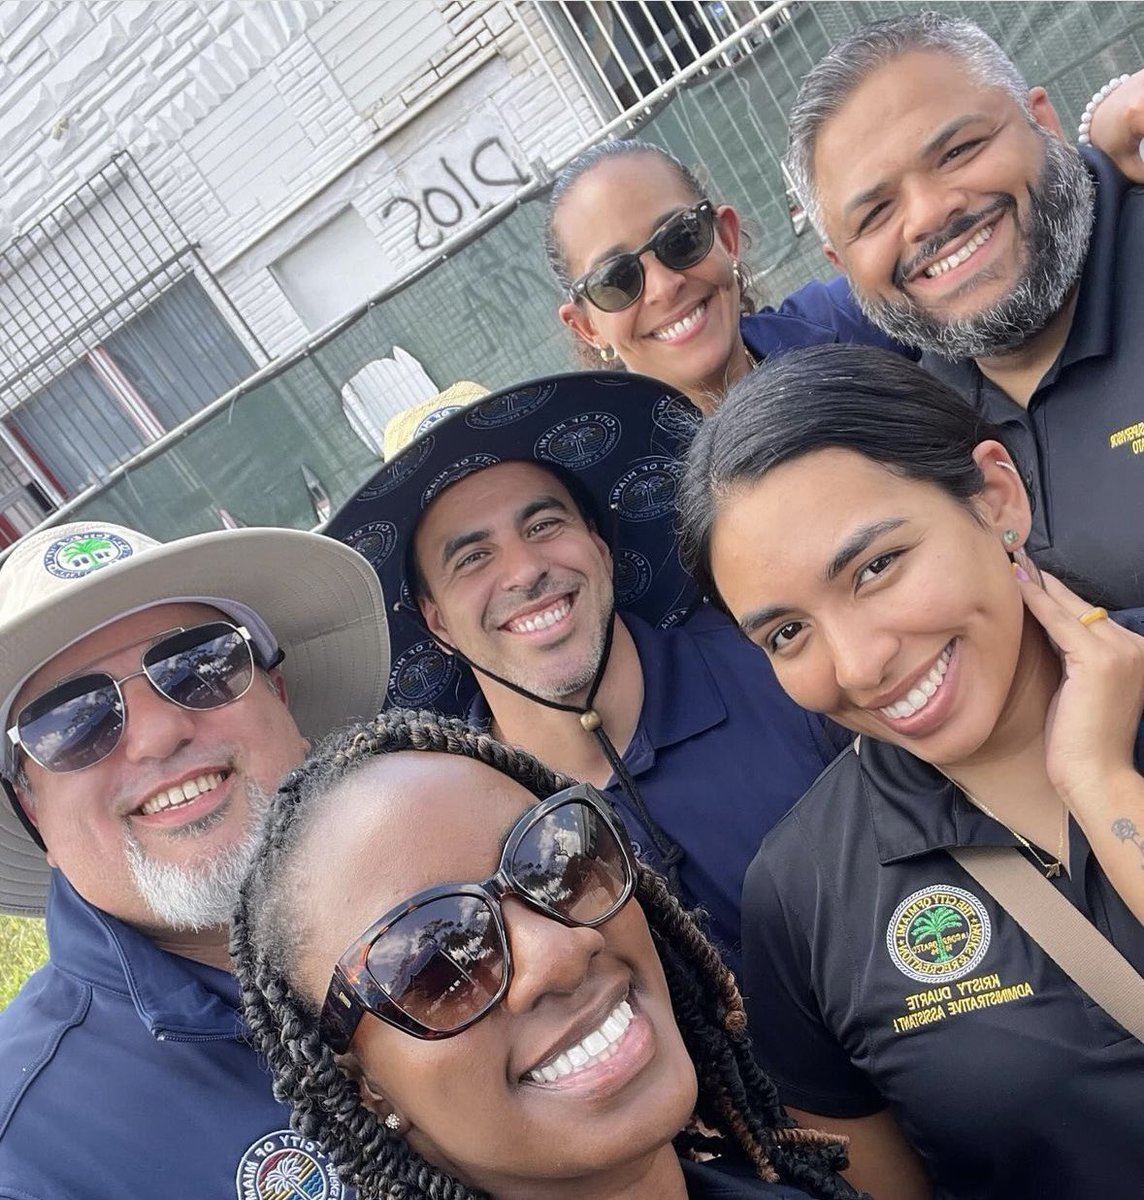 All smiles and lots of team work! 💪🏻 Happy Wednesday! We hope you are having a great week! 💚

#MiamiParks #CityofMiamiParks #CityofMiamiParksandRecreation #MiamiParksandRecreation
#MiamiParksandRec #CityofMiami #Miami #Parks #Recreation #ParksandRecreation #ParksandRec